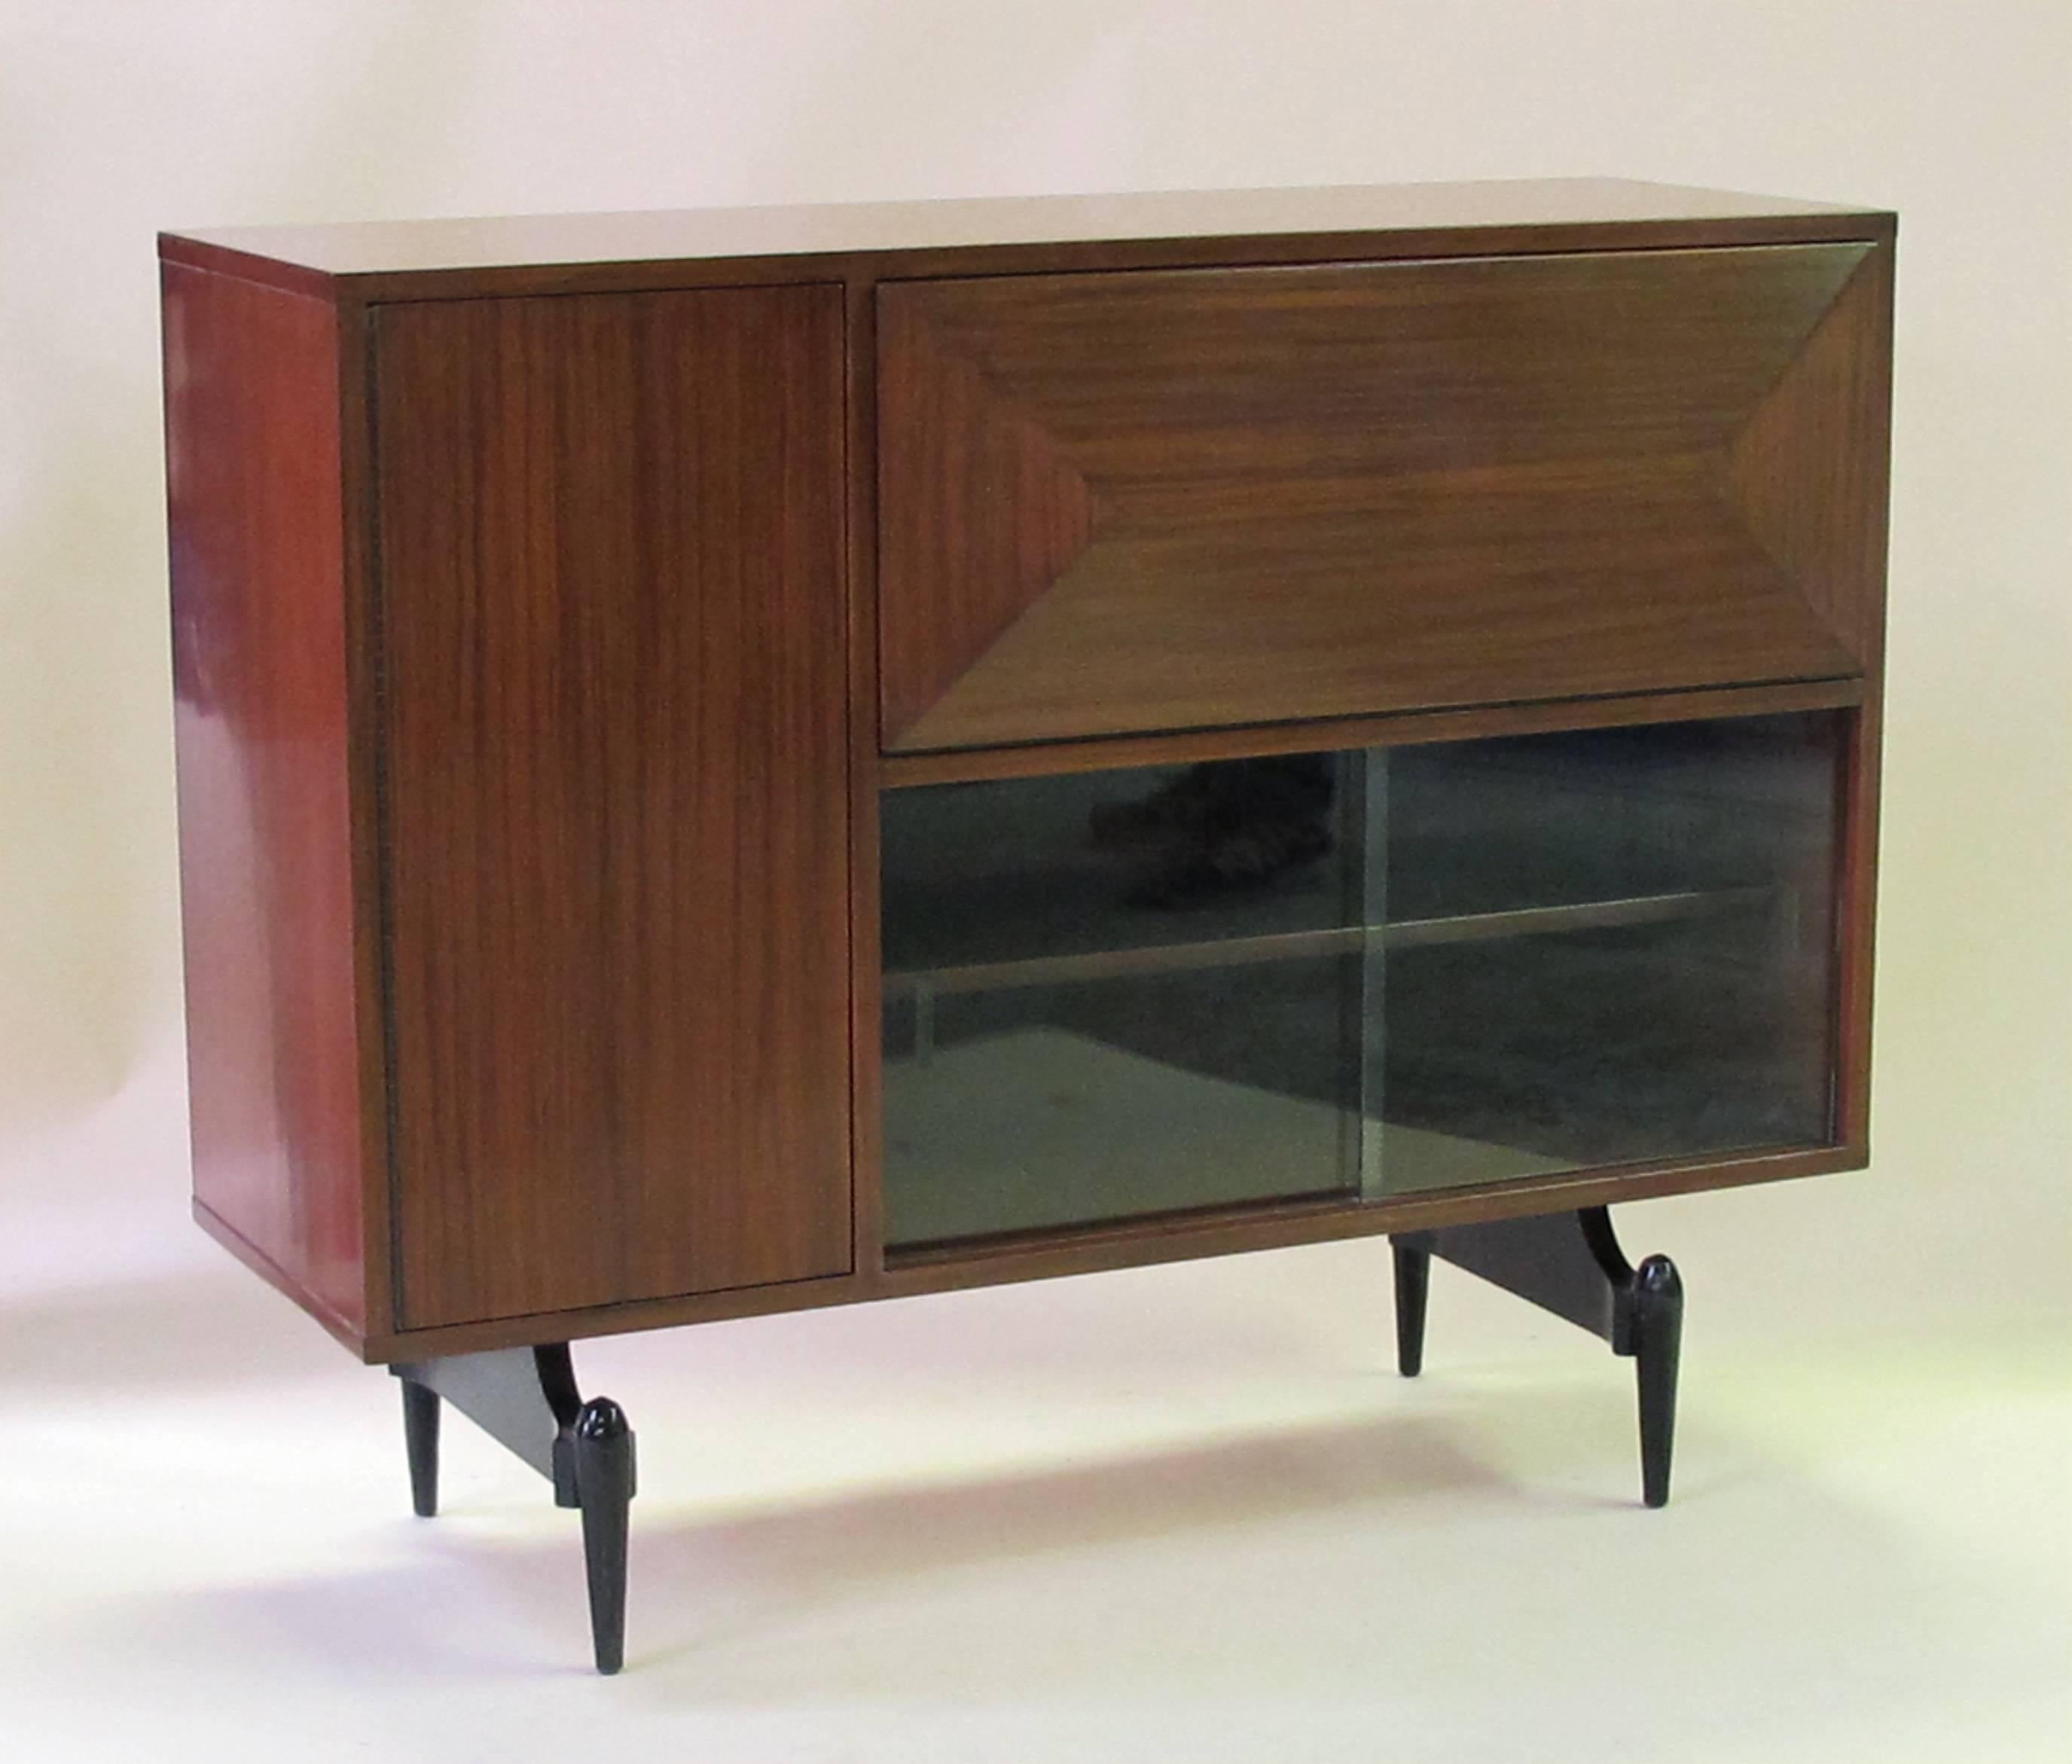 To complete that cool midcentury decor, this fine quality dry bar with hinged drop-front opening to reveal a lighted and mirrored interior fitted with caddies for glassware (original glassware included, only one glass missing); above sliding glass